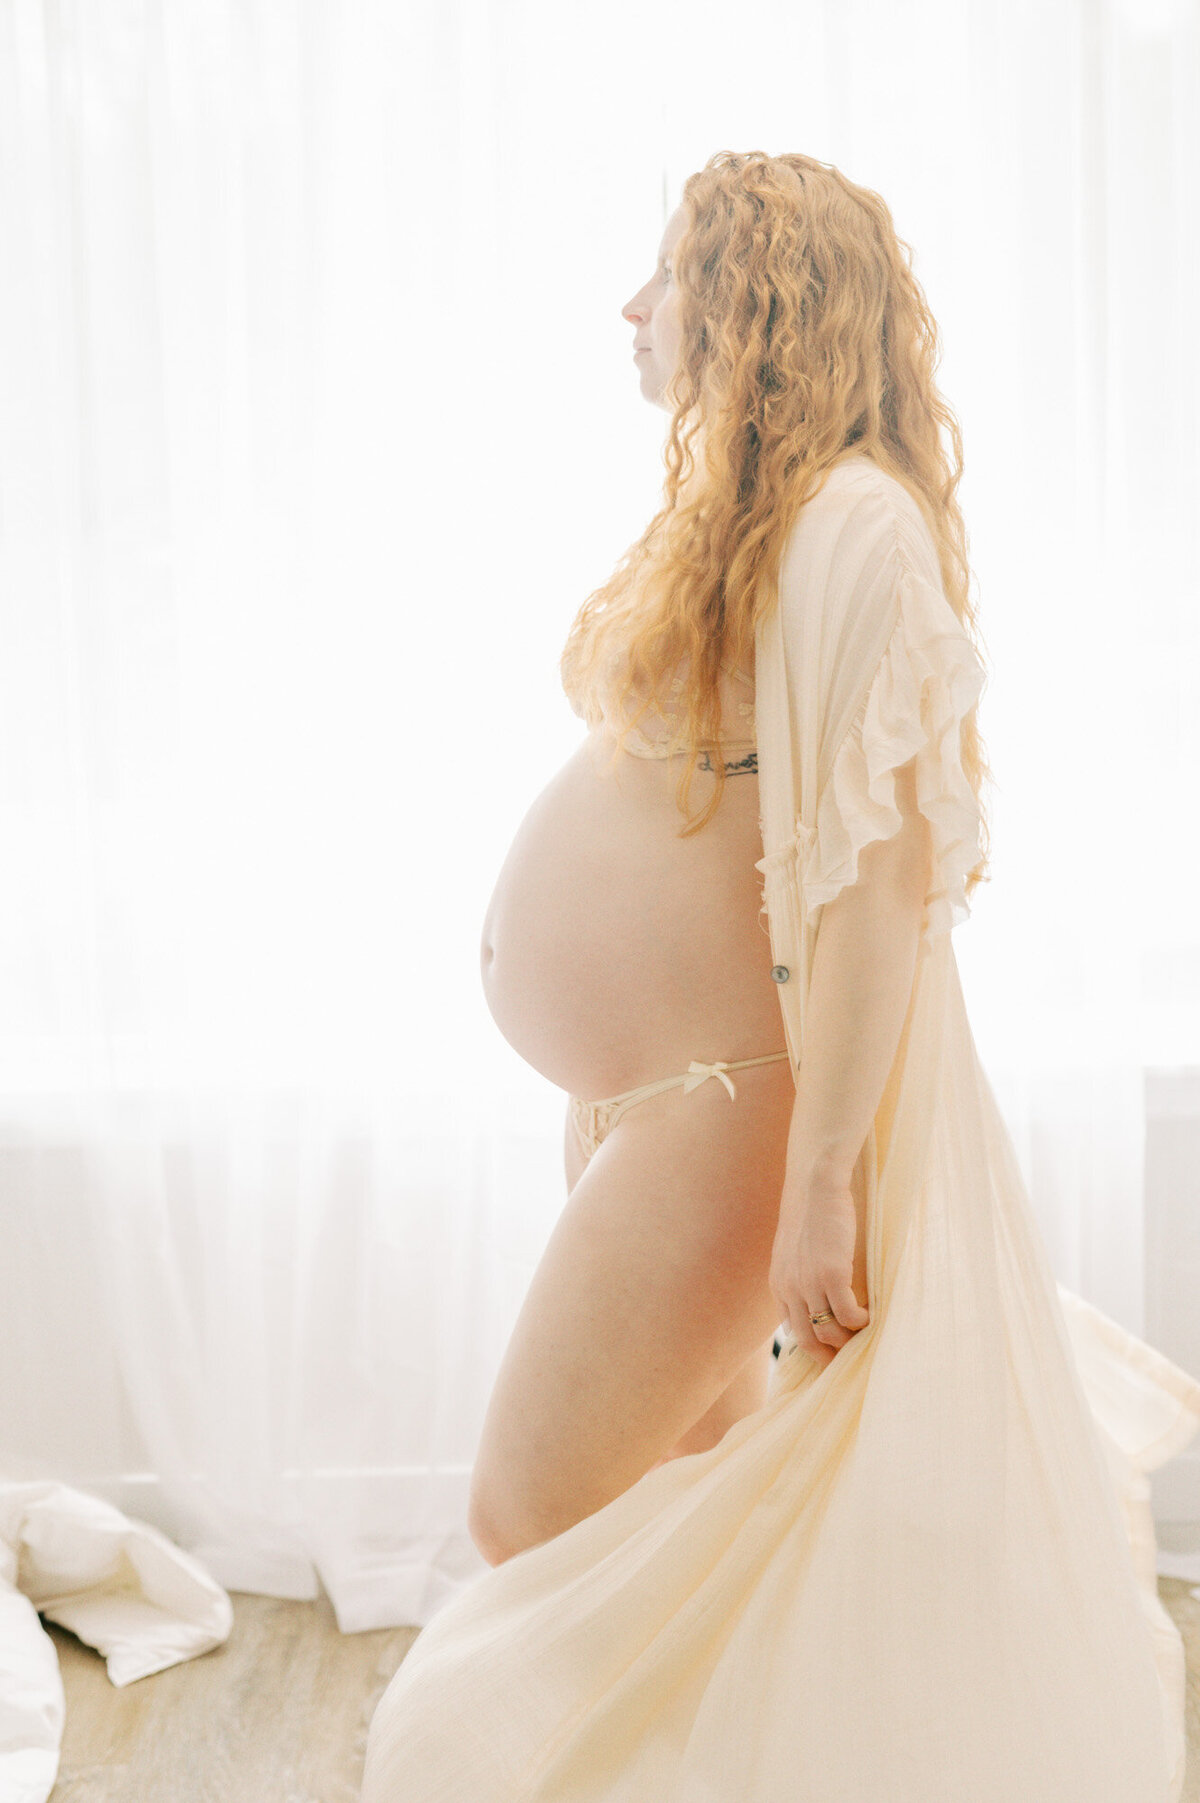 intimate-maternity-boudoir-session-97